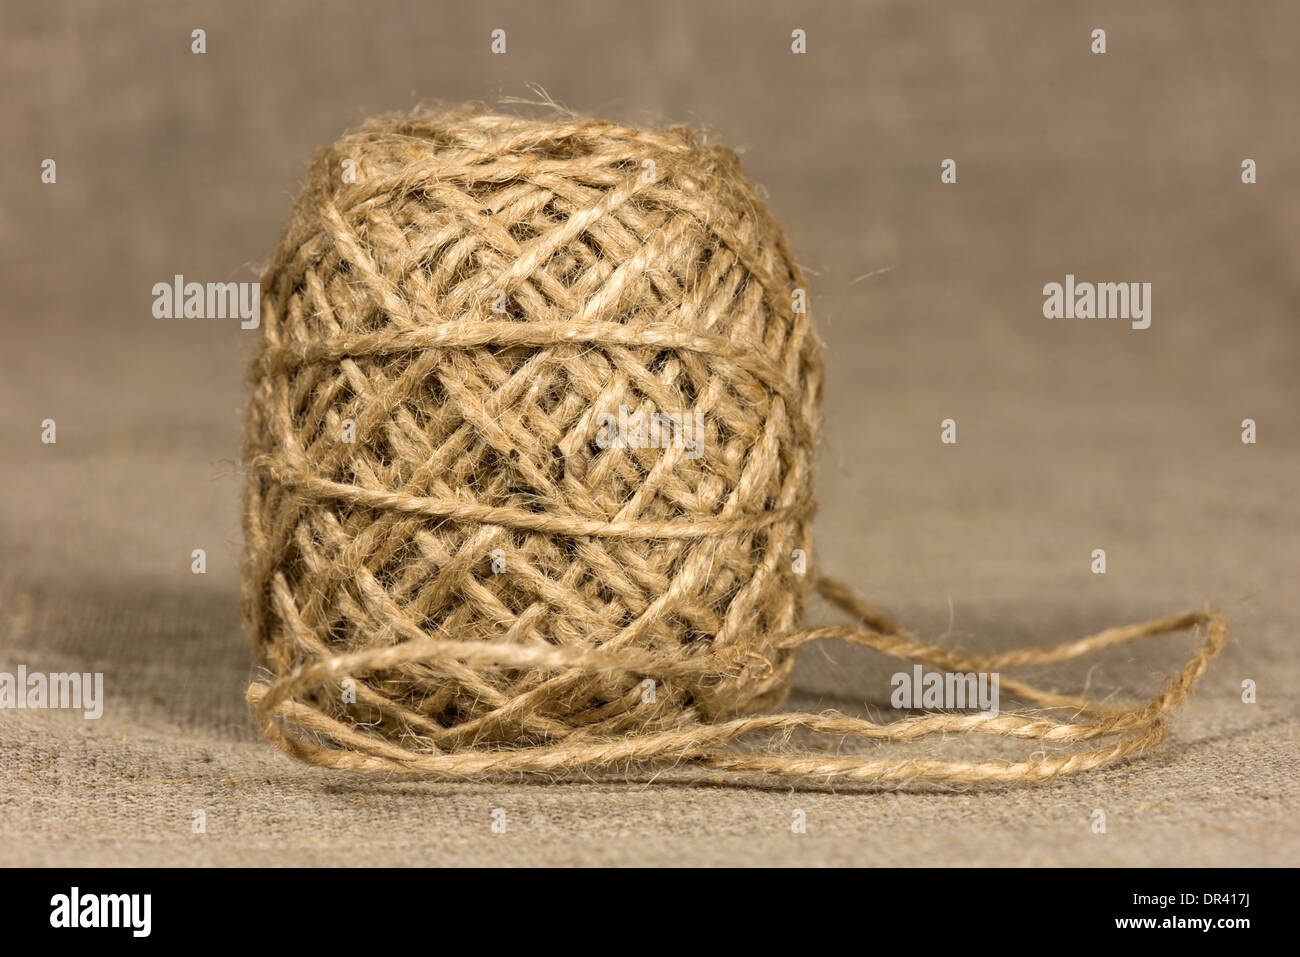 jute yarn coiling into a ball on the cloth Stock Photo